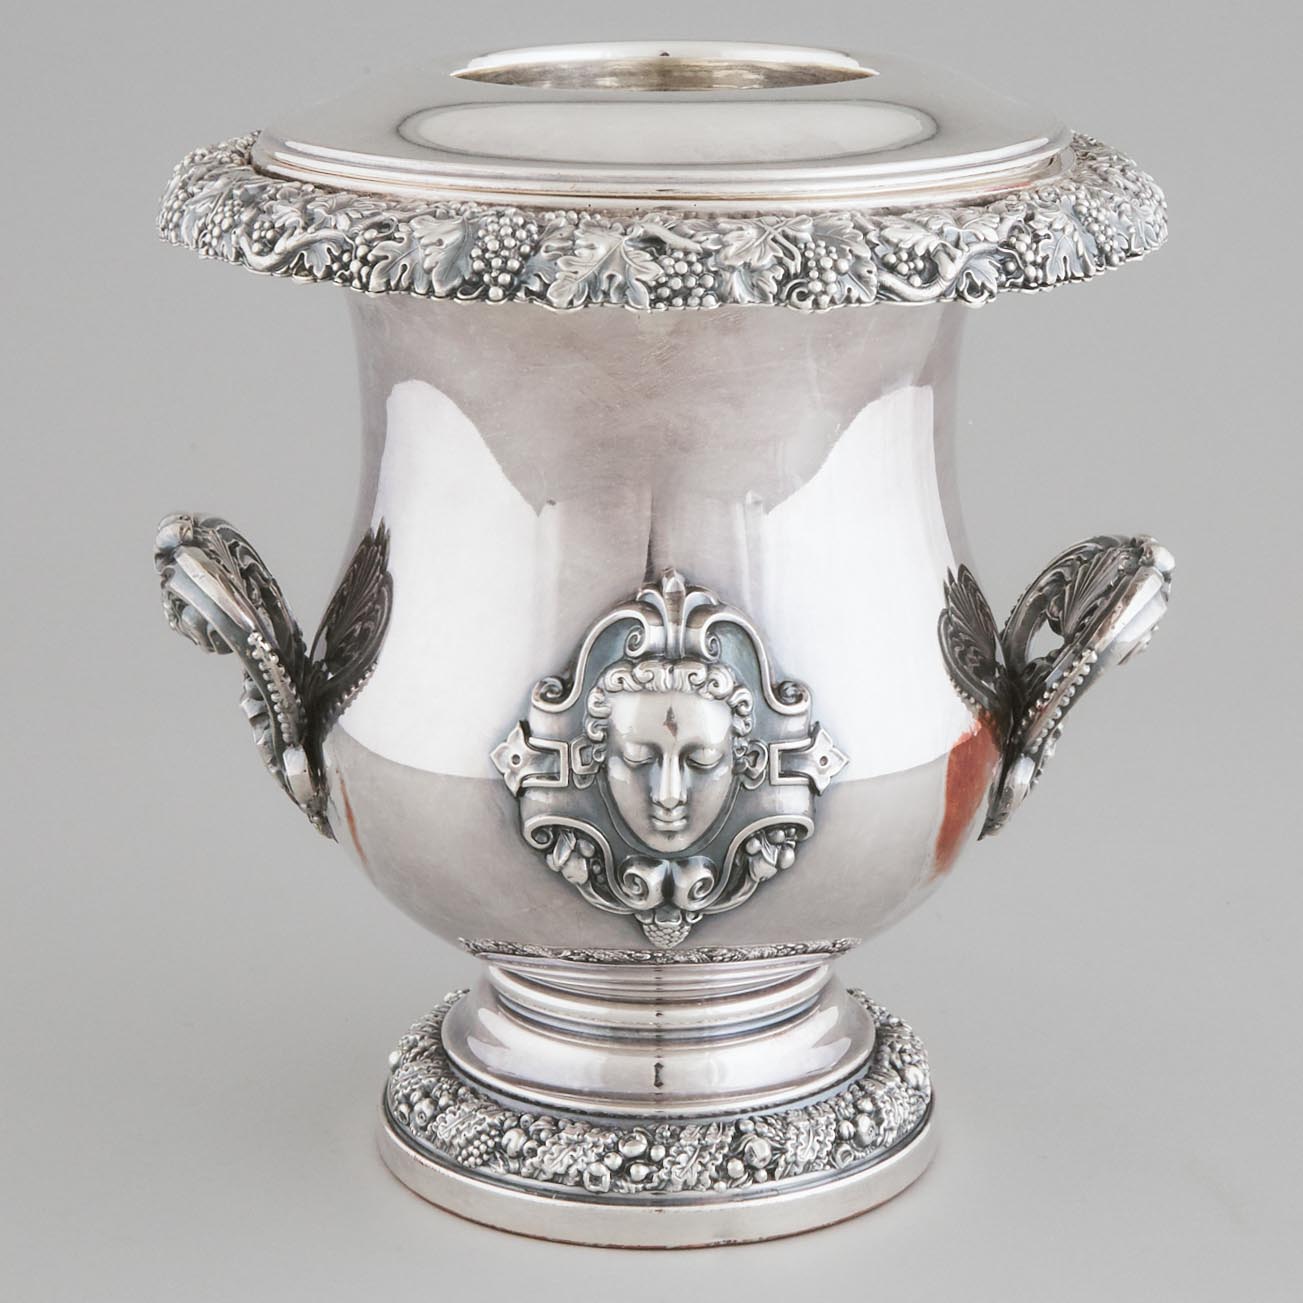 French Silver Plated Wine Cooler, Gandais of Paris, c.1835